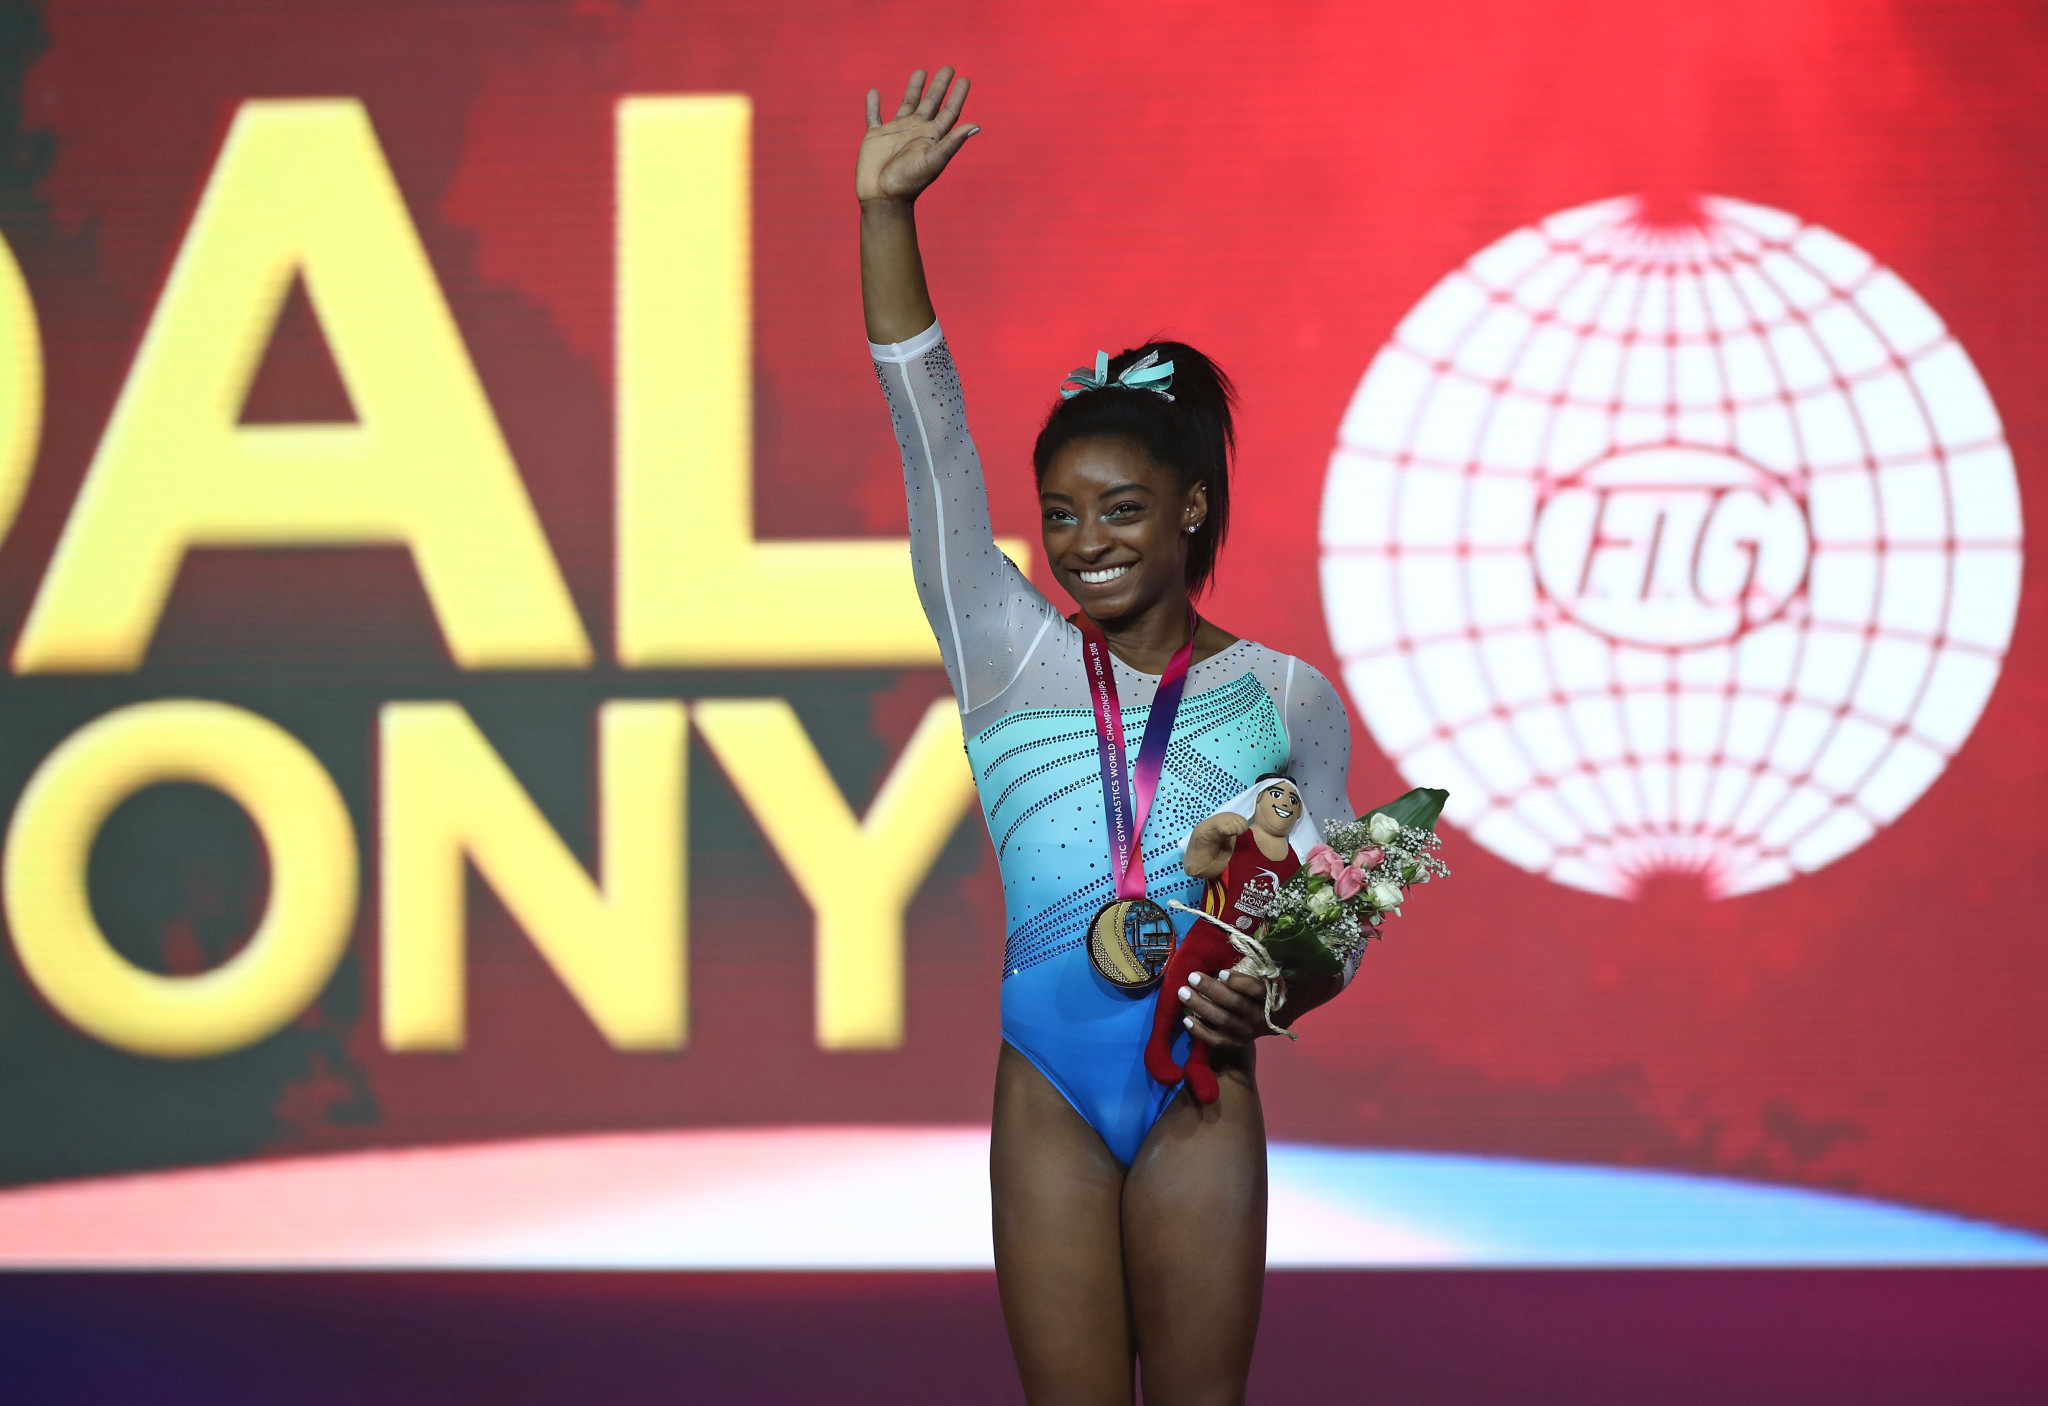 American superstar Simone Biles became a 12-time gold medallist at the Artistic Gymnastics World Championships in Doha ©Getty Images